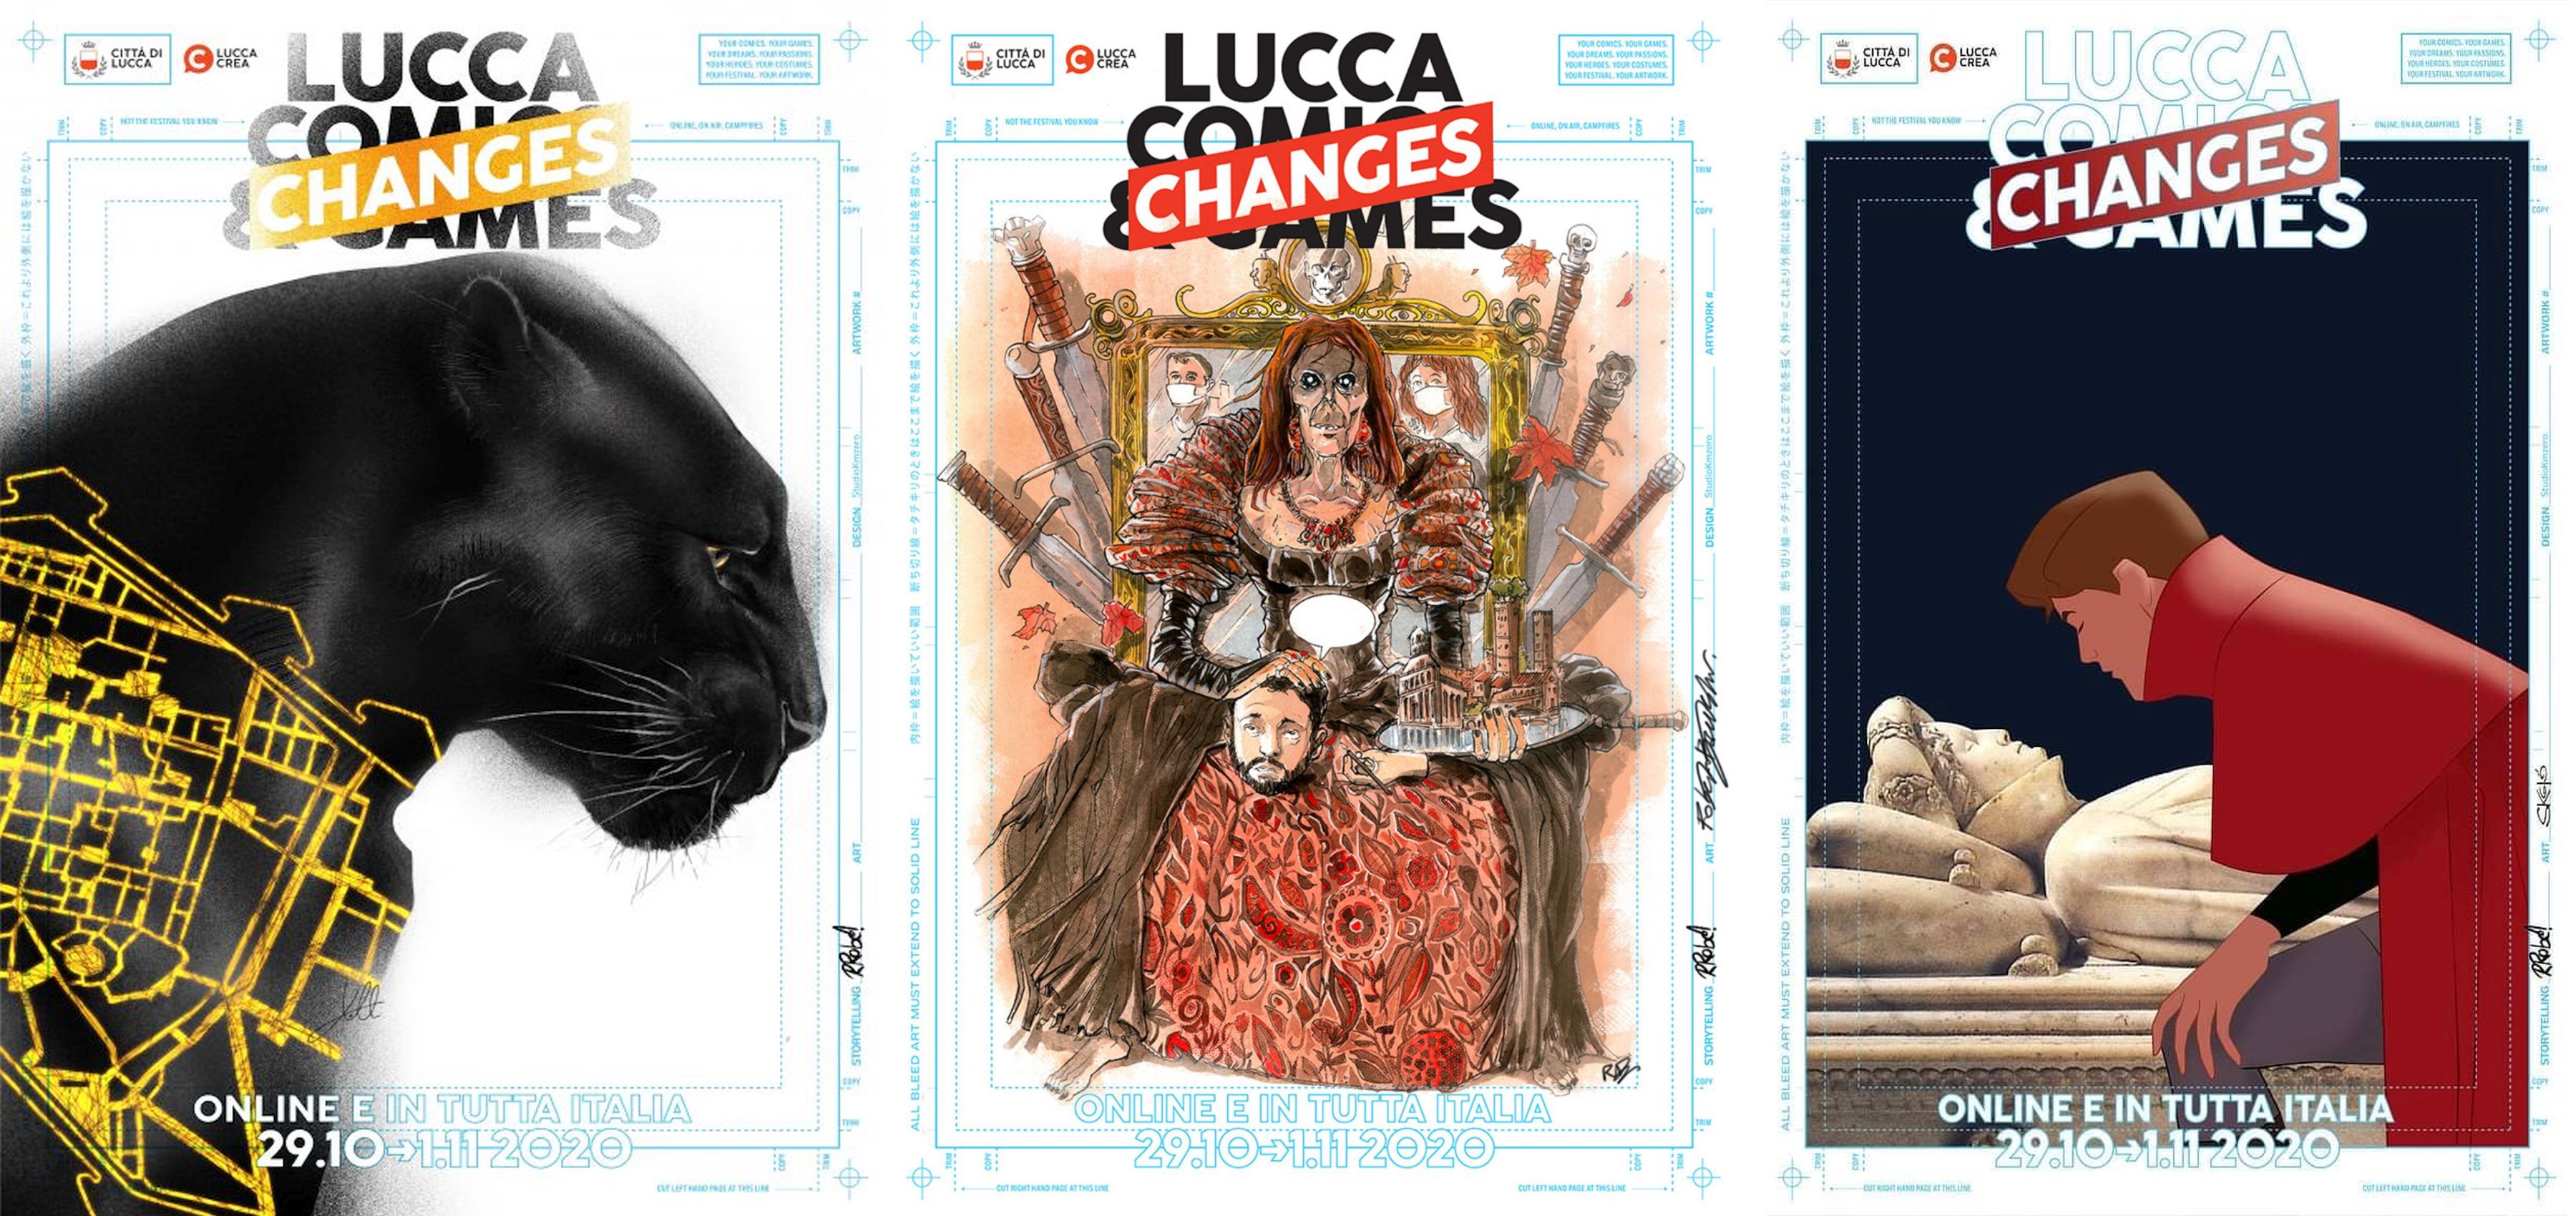 lucca comics and games poster 